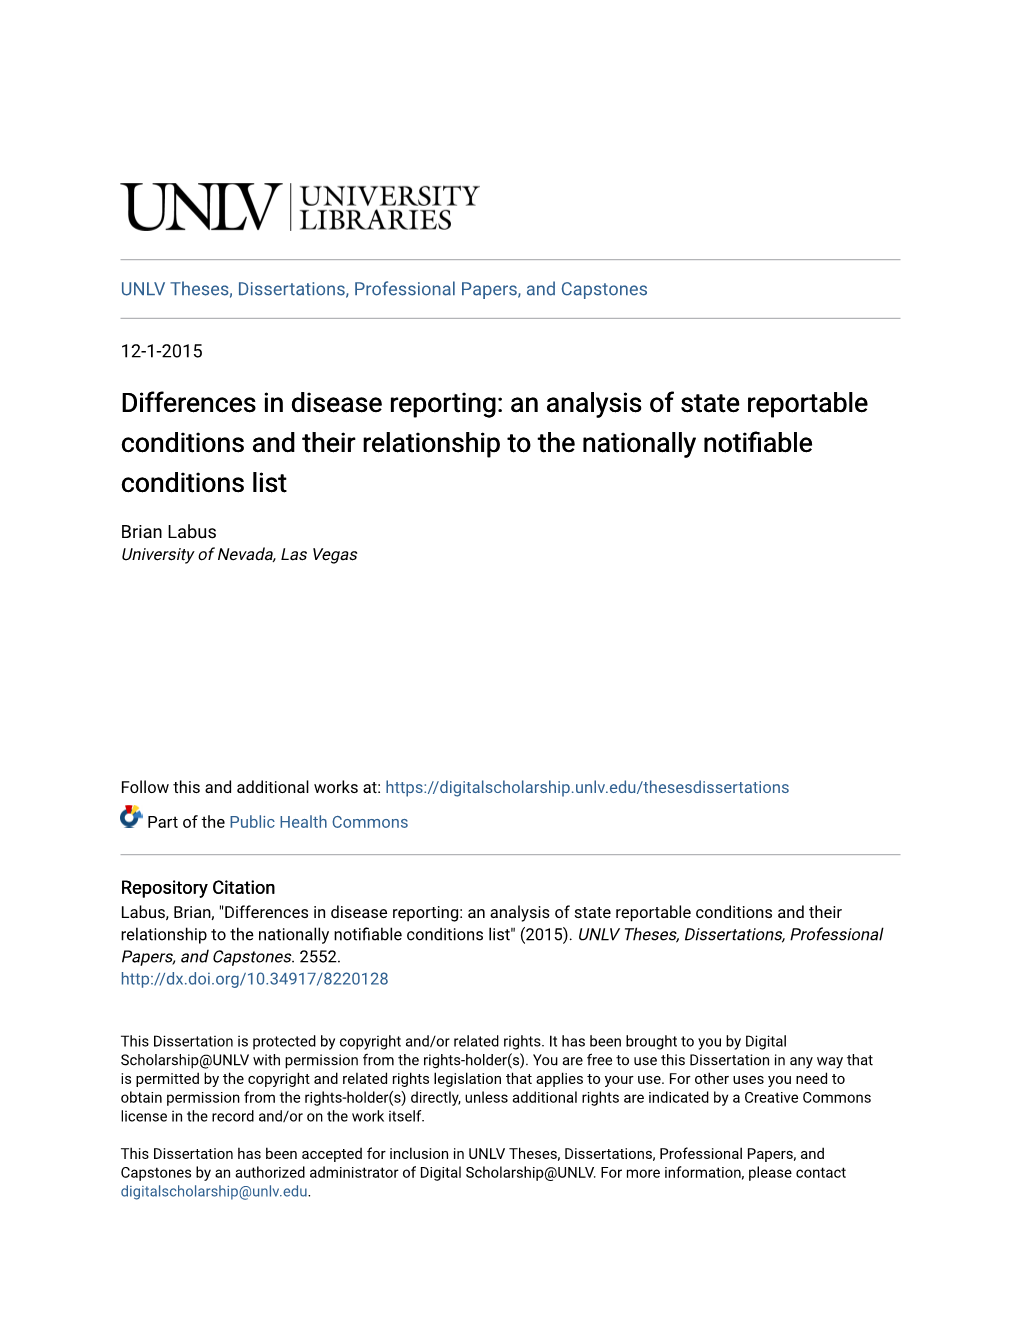 Differences in Disease Reporting: an Analysis of State Reportable Conditions and Their Relationship to the Nationally Notifiable Conditions List